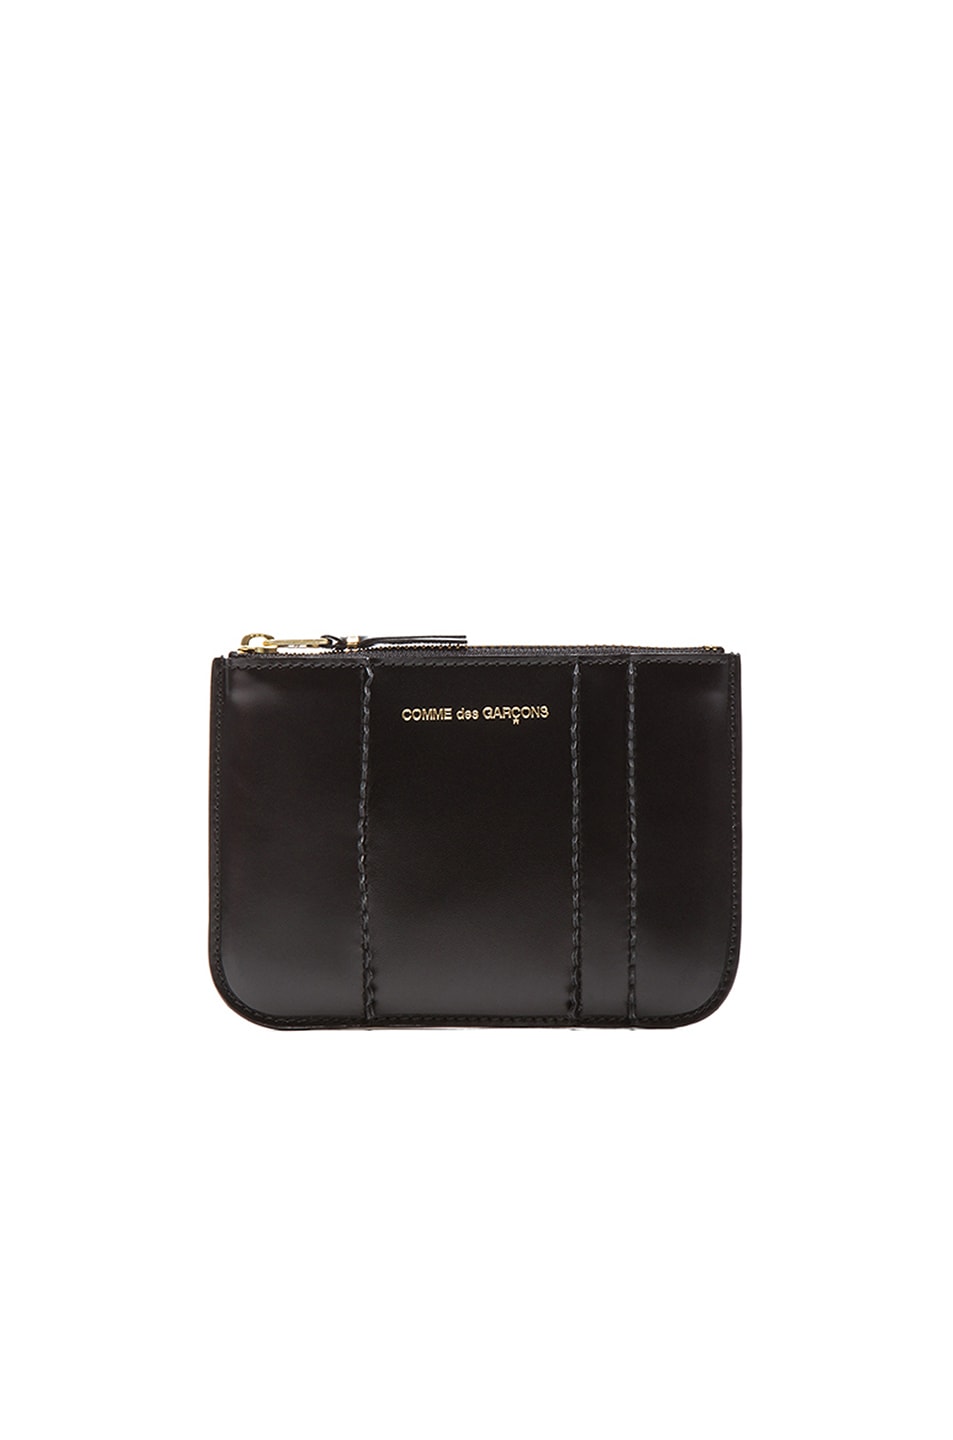 Image 1 of COMME des GARCONS Raised Spike Small Pouch in Black